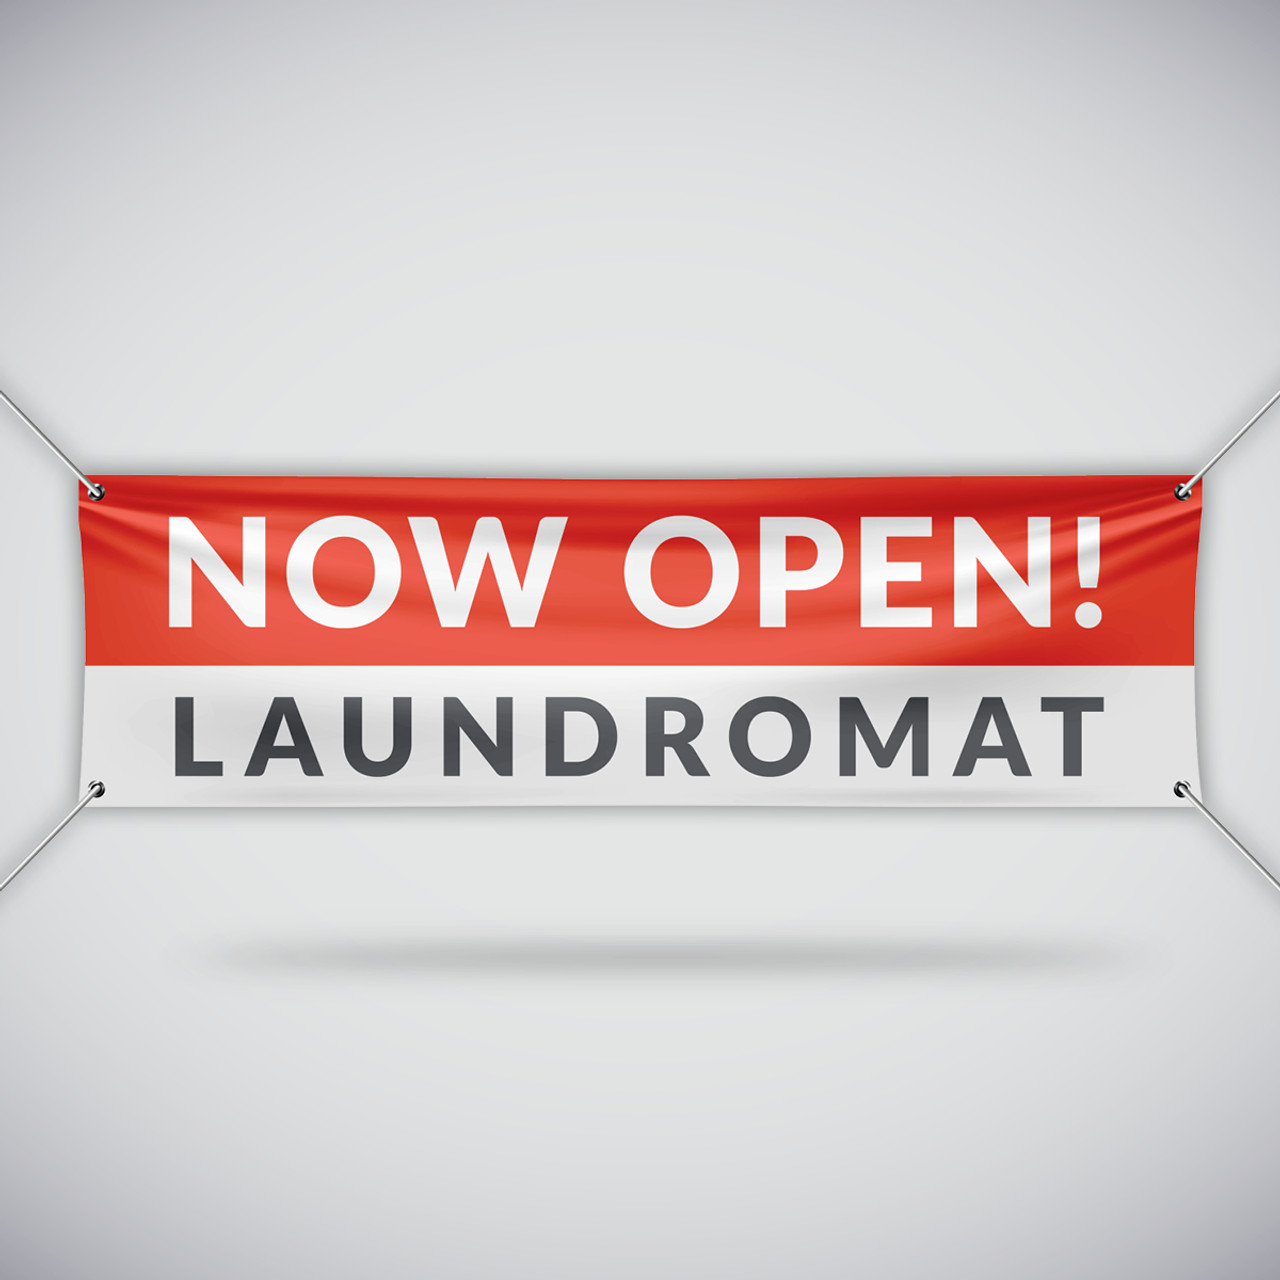 Now Open Laundromat Banner - Red